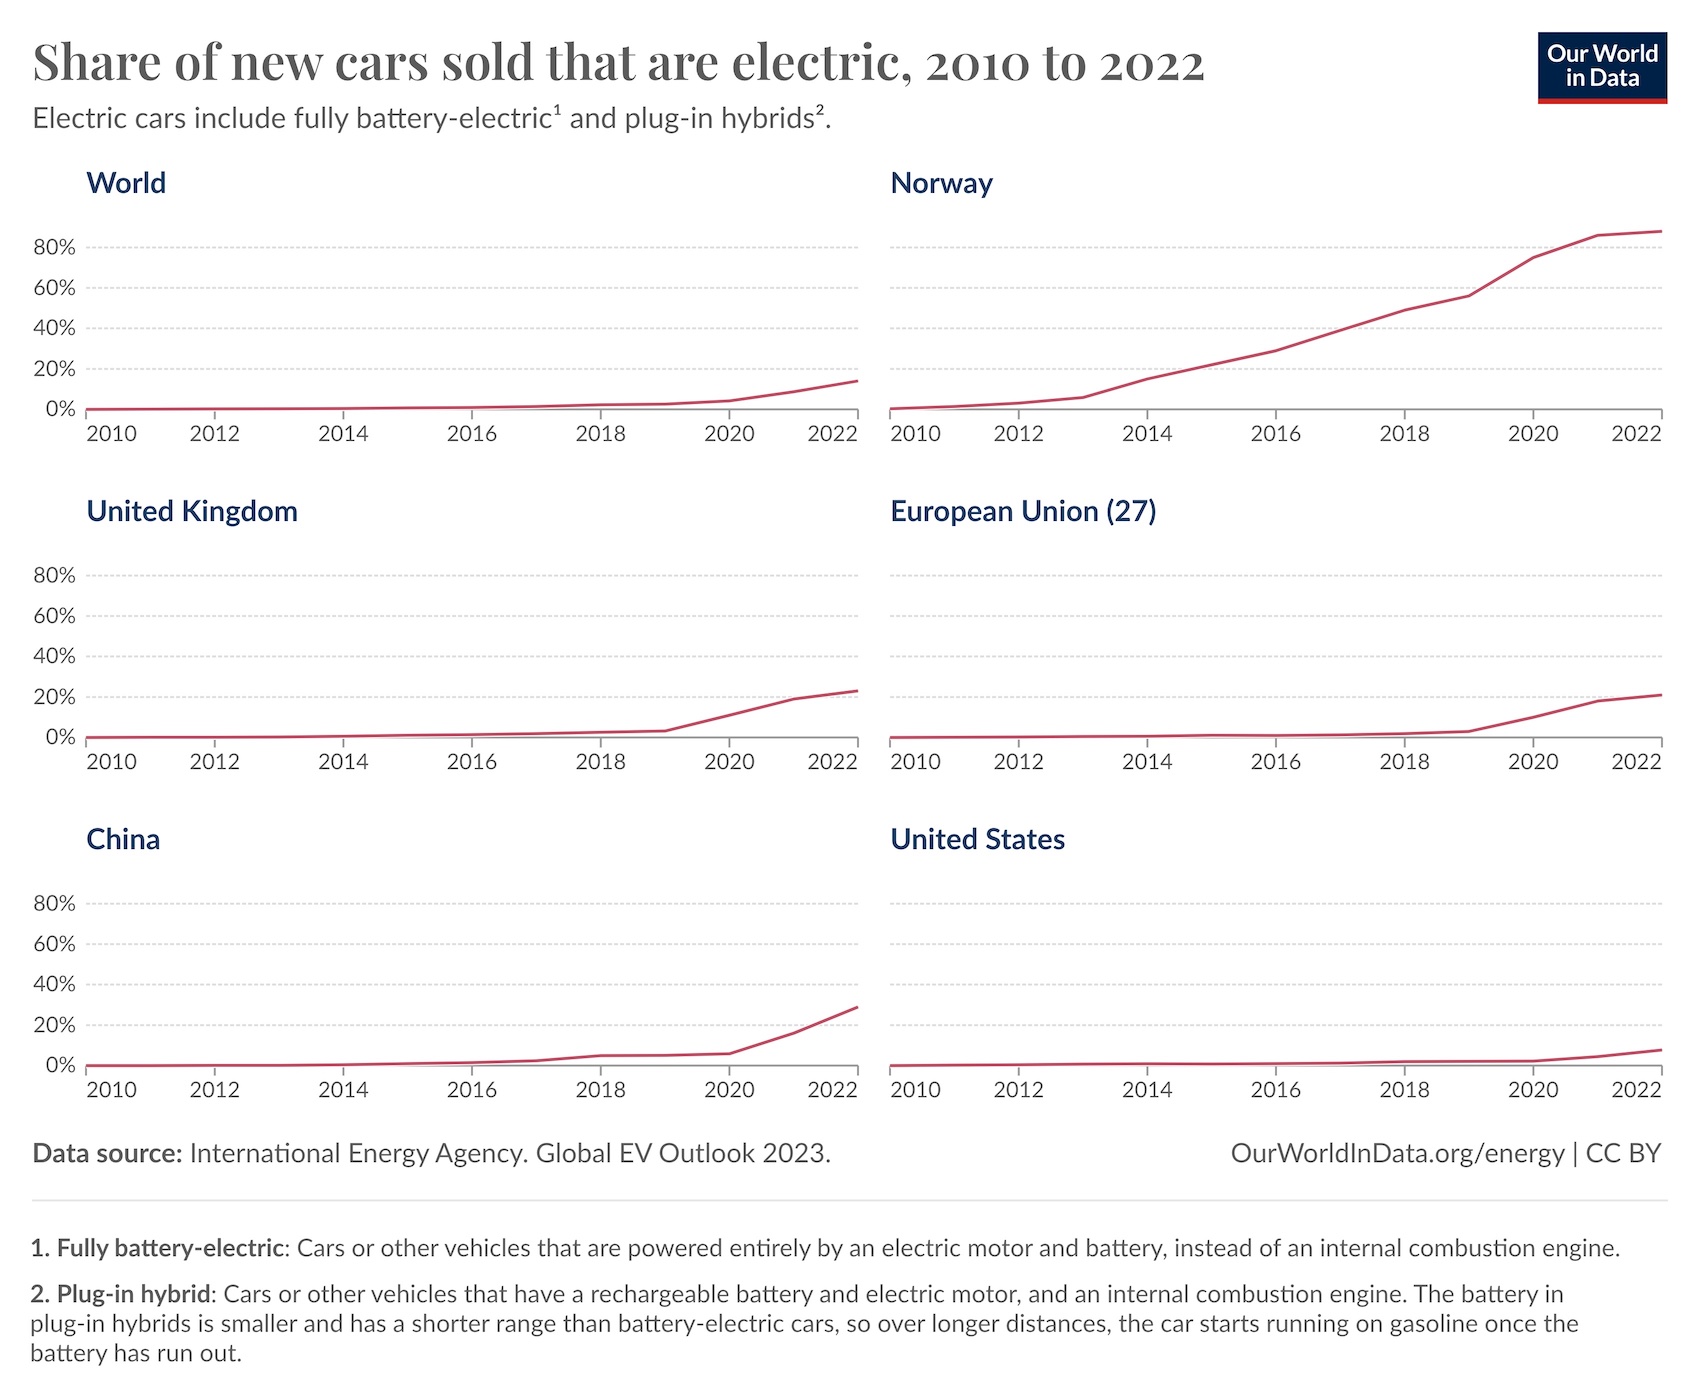 Graph illustrating the share of electric and plug-in hybrid cars sold from 2010 to 2022 in the uk, eu, china, and the us.